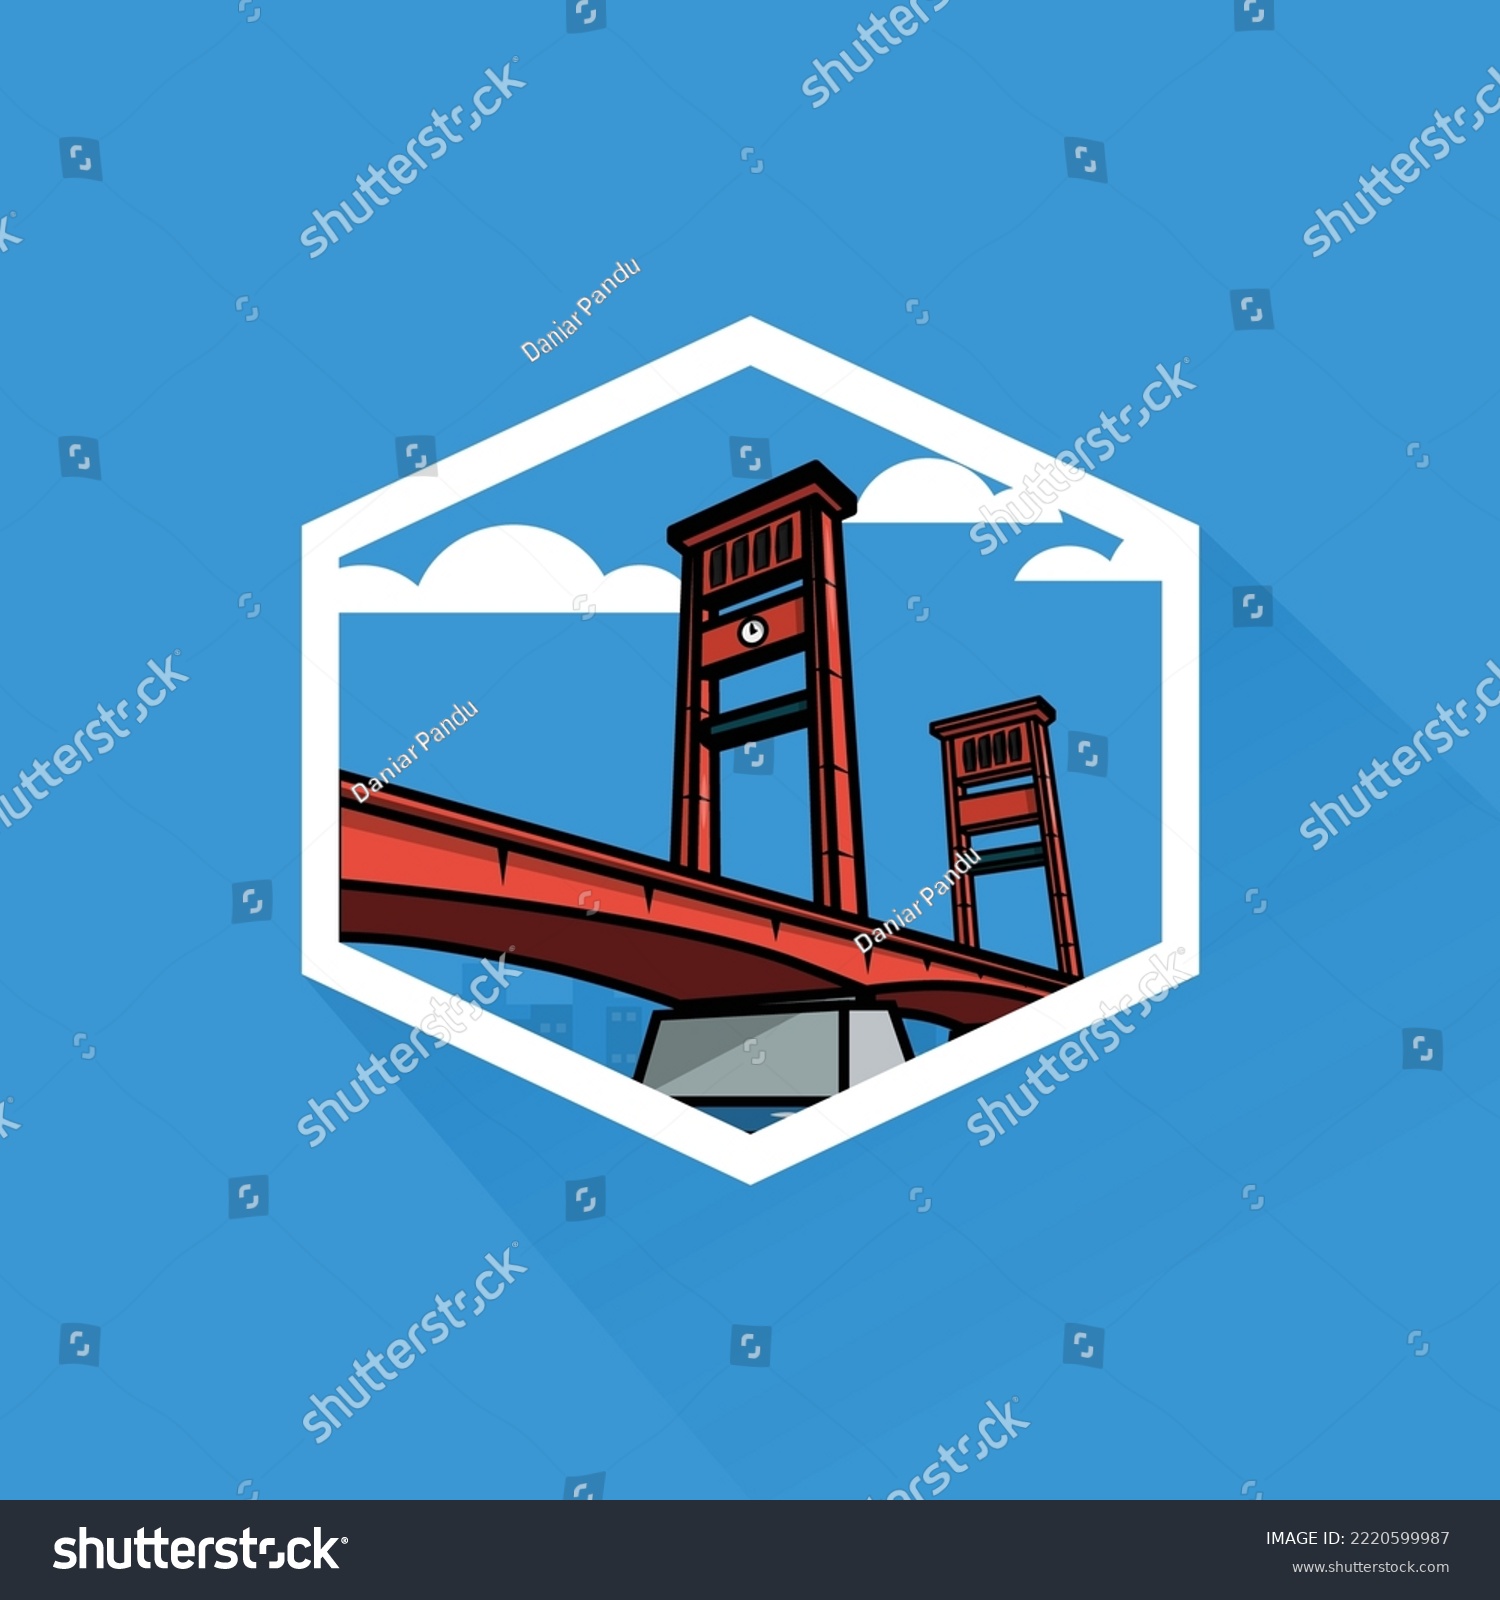 SVG of Flat Design of Ampera Bridge, can be used as Sticker, Logo, and Poster svg